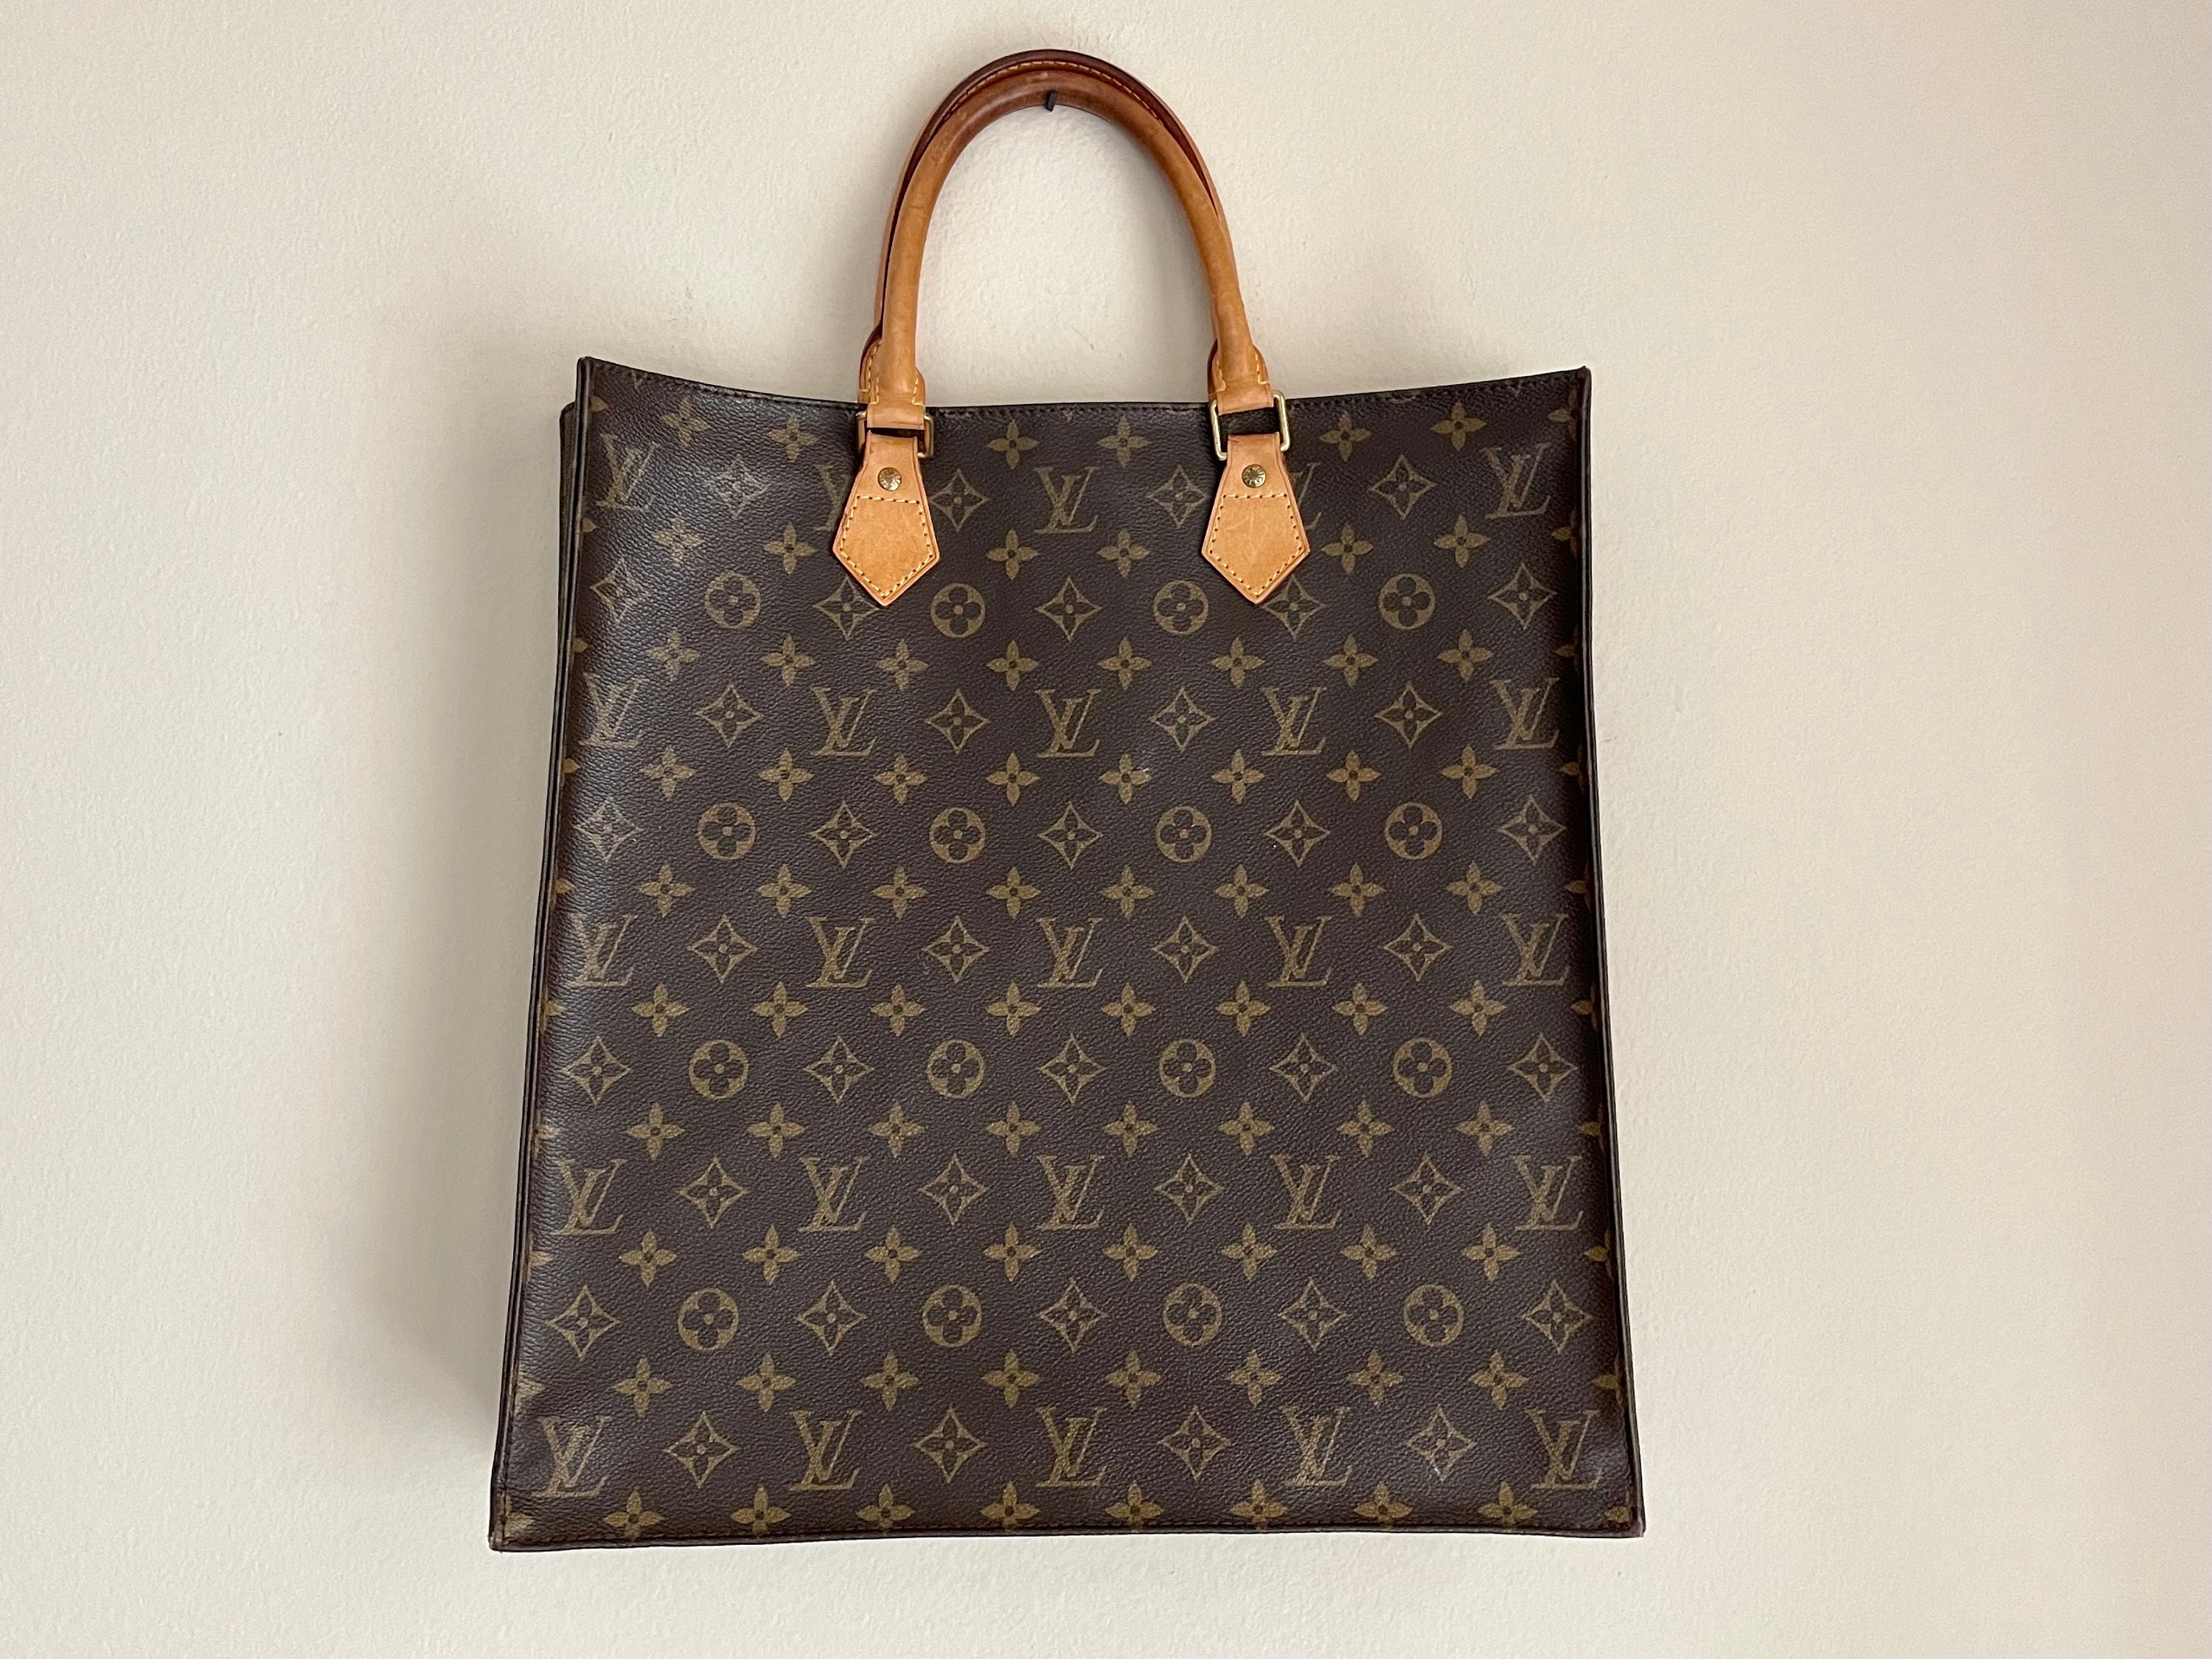 LV Sac Plat BB. What fits inside. This is way better than Petite